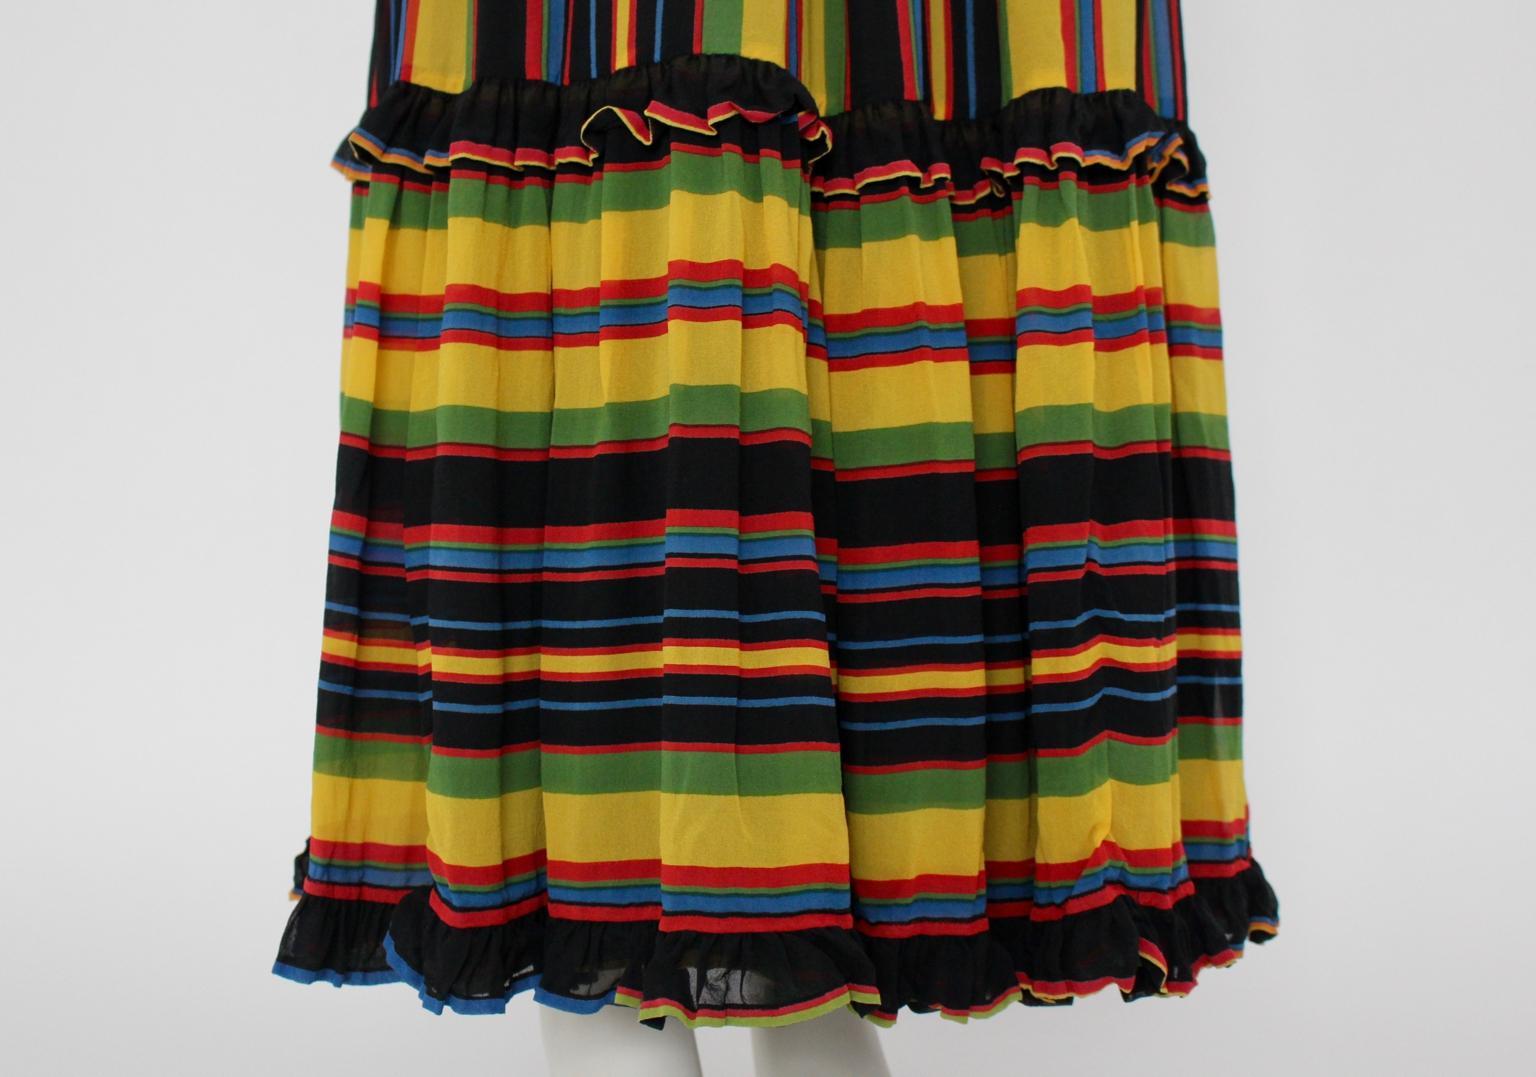 Rare and colorful skirt made of silk with stripes in the colors yellow, black, red and blue with a tiered ruffle.
Italian size: 46
best for medium
Taille: 32 cm
Length: 100 cm

Very good vintage condition